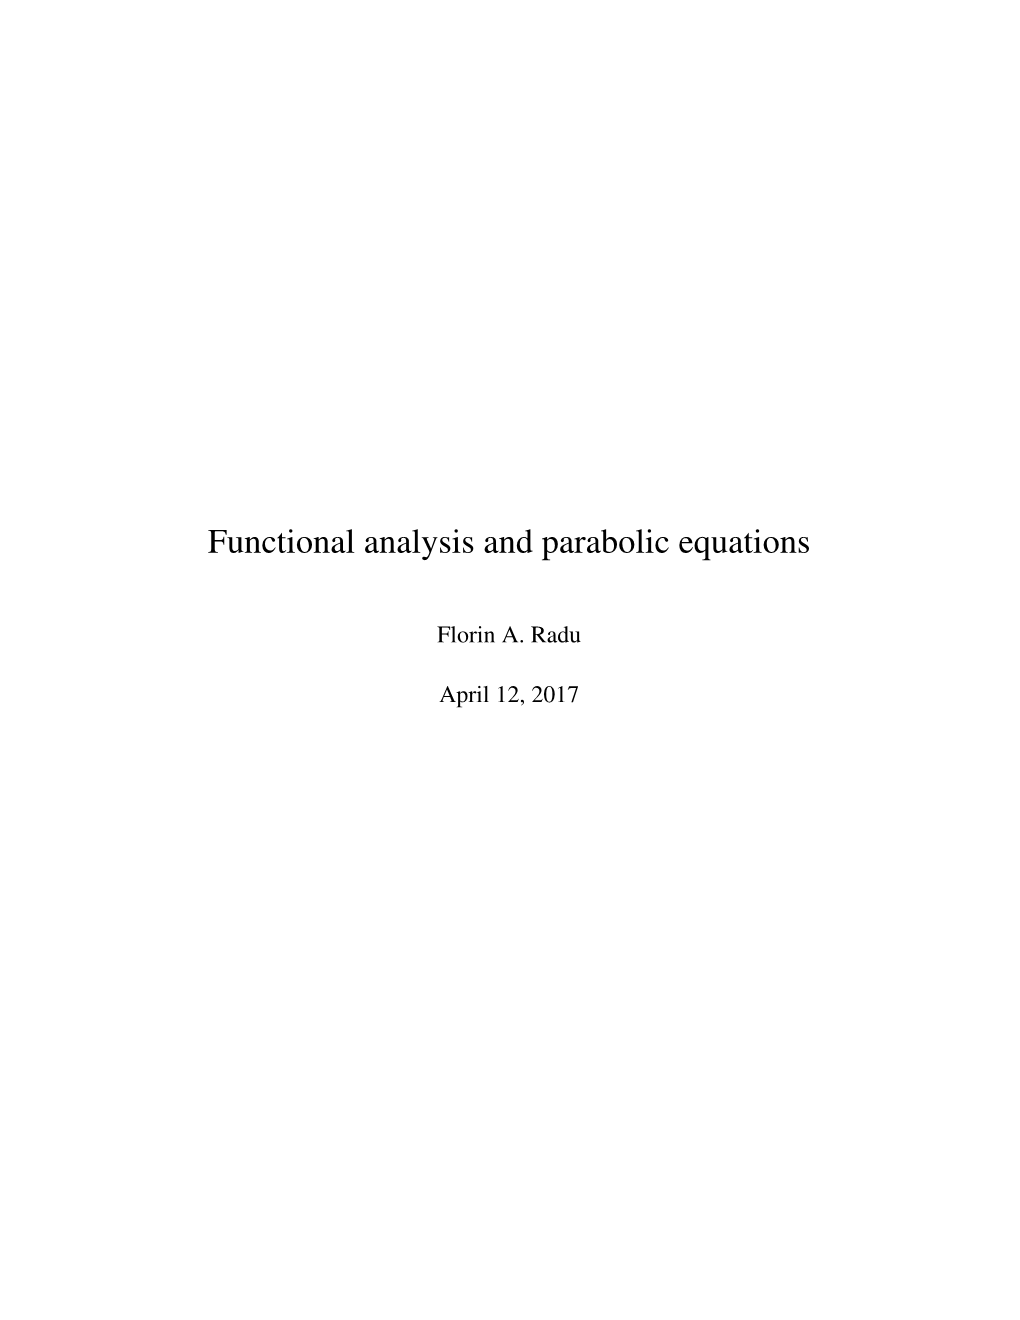 Functional Analysis and Parabolic Equations